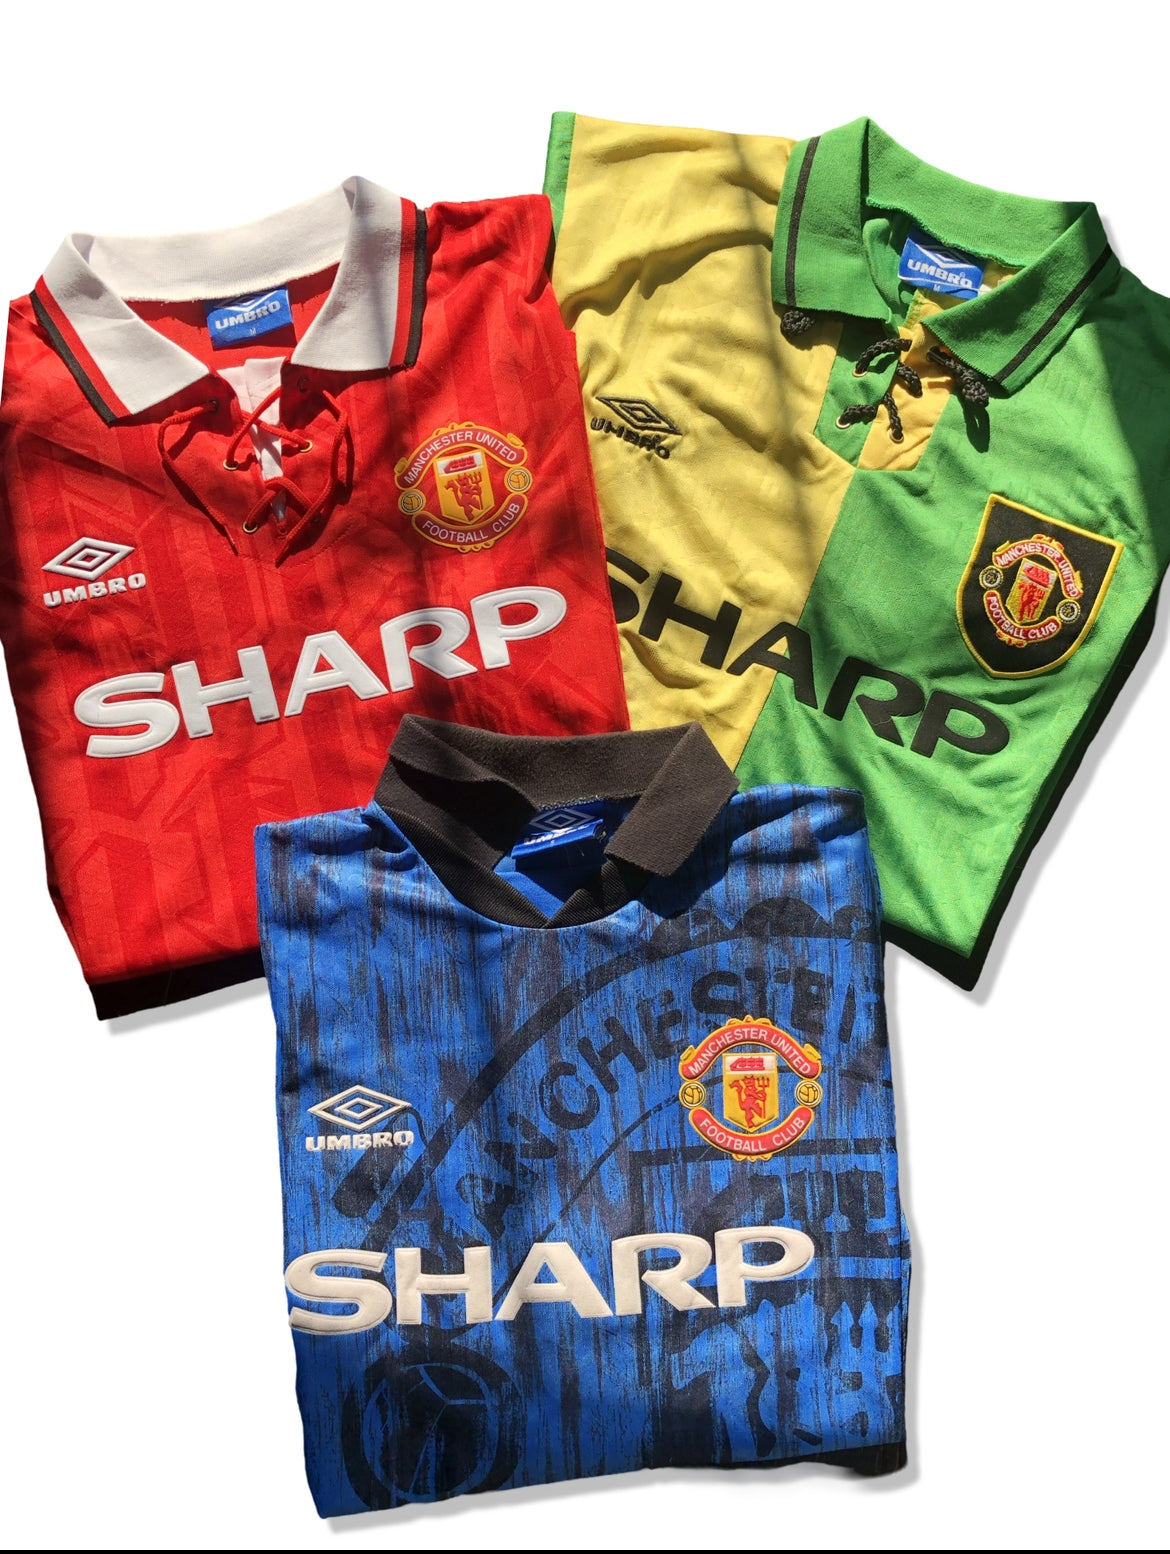 Our favorite! Shop our comprehensive collection of United shirts.